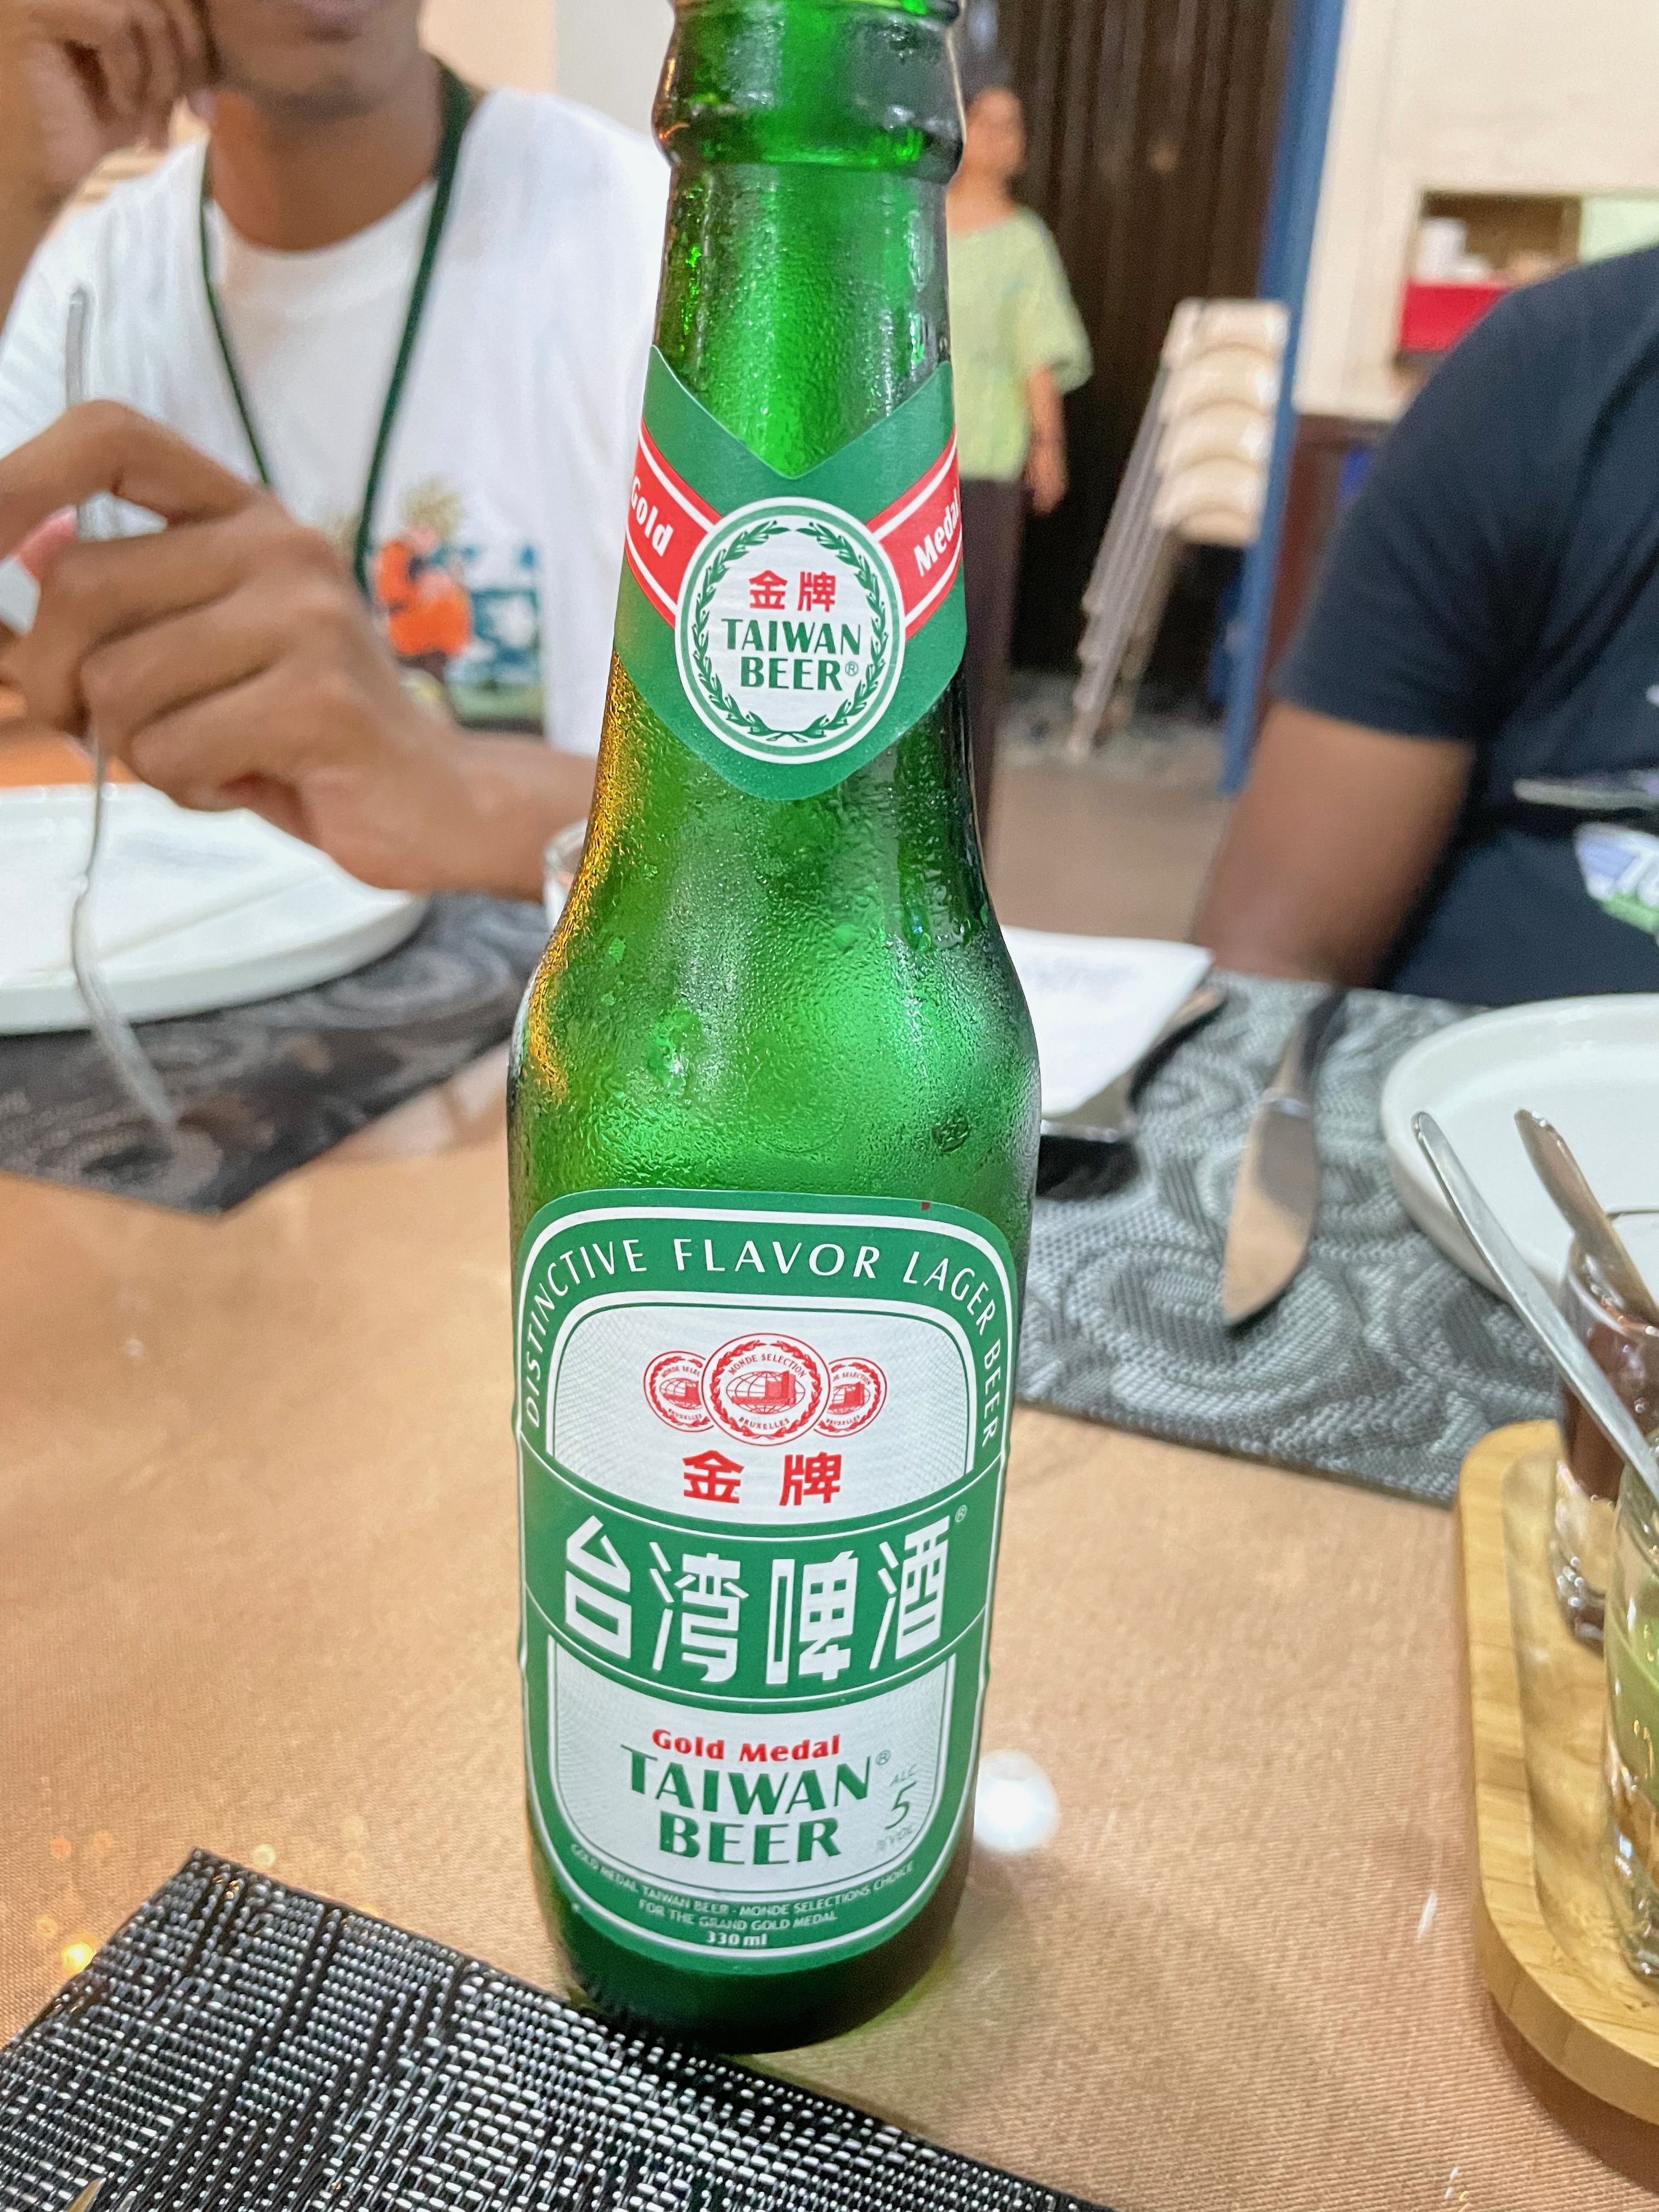 Asian beers are surprisingly good